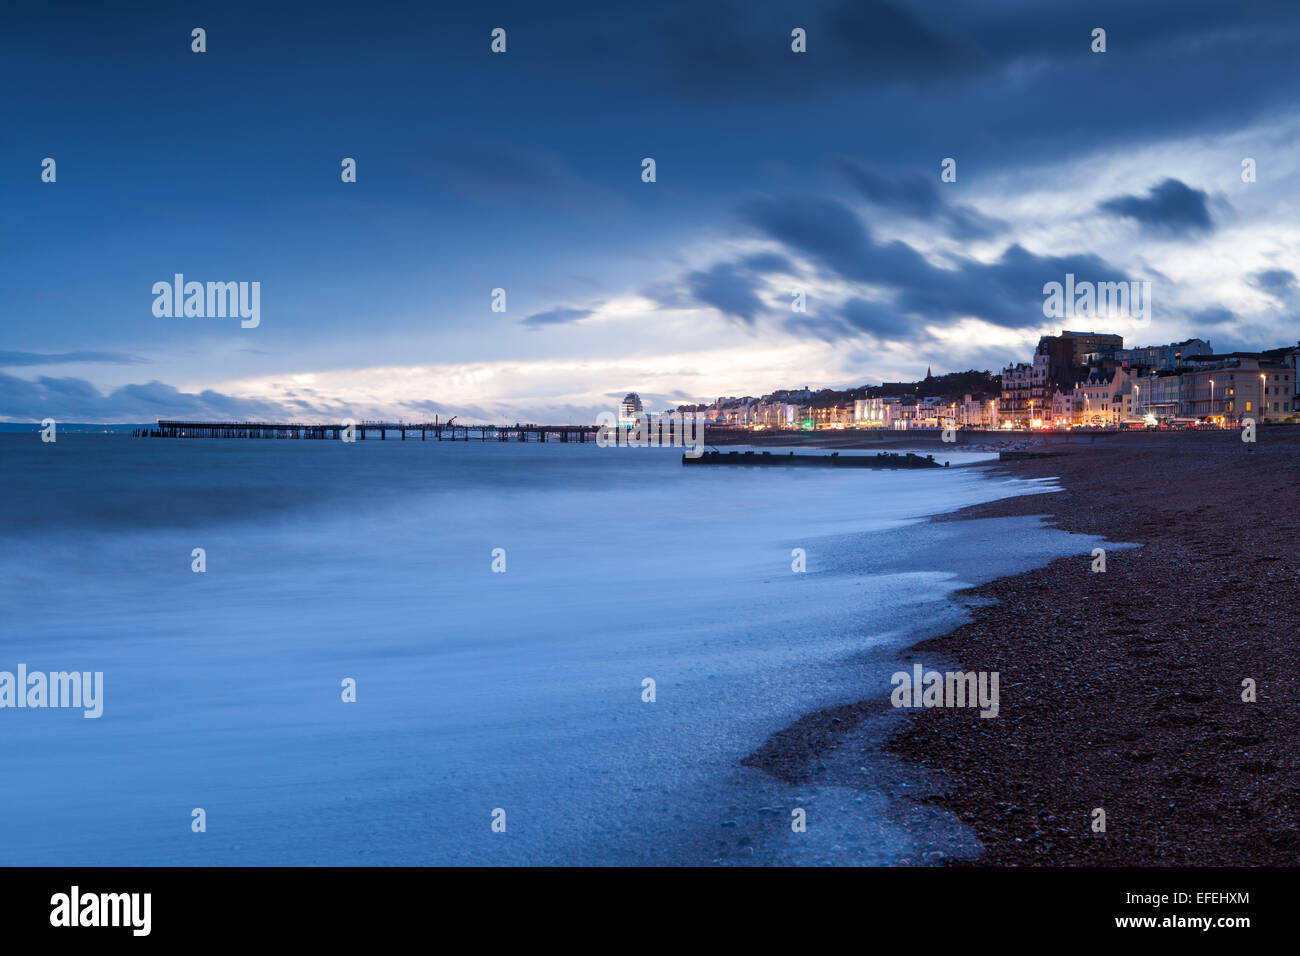 Hastings Seafront and Pier. Waves crash onto the beach at sunset. while the lights of the town twinkle in the background. Stock Photo